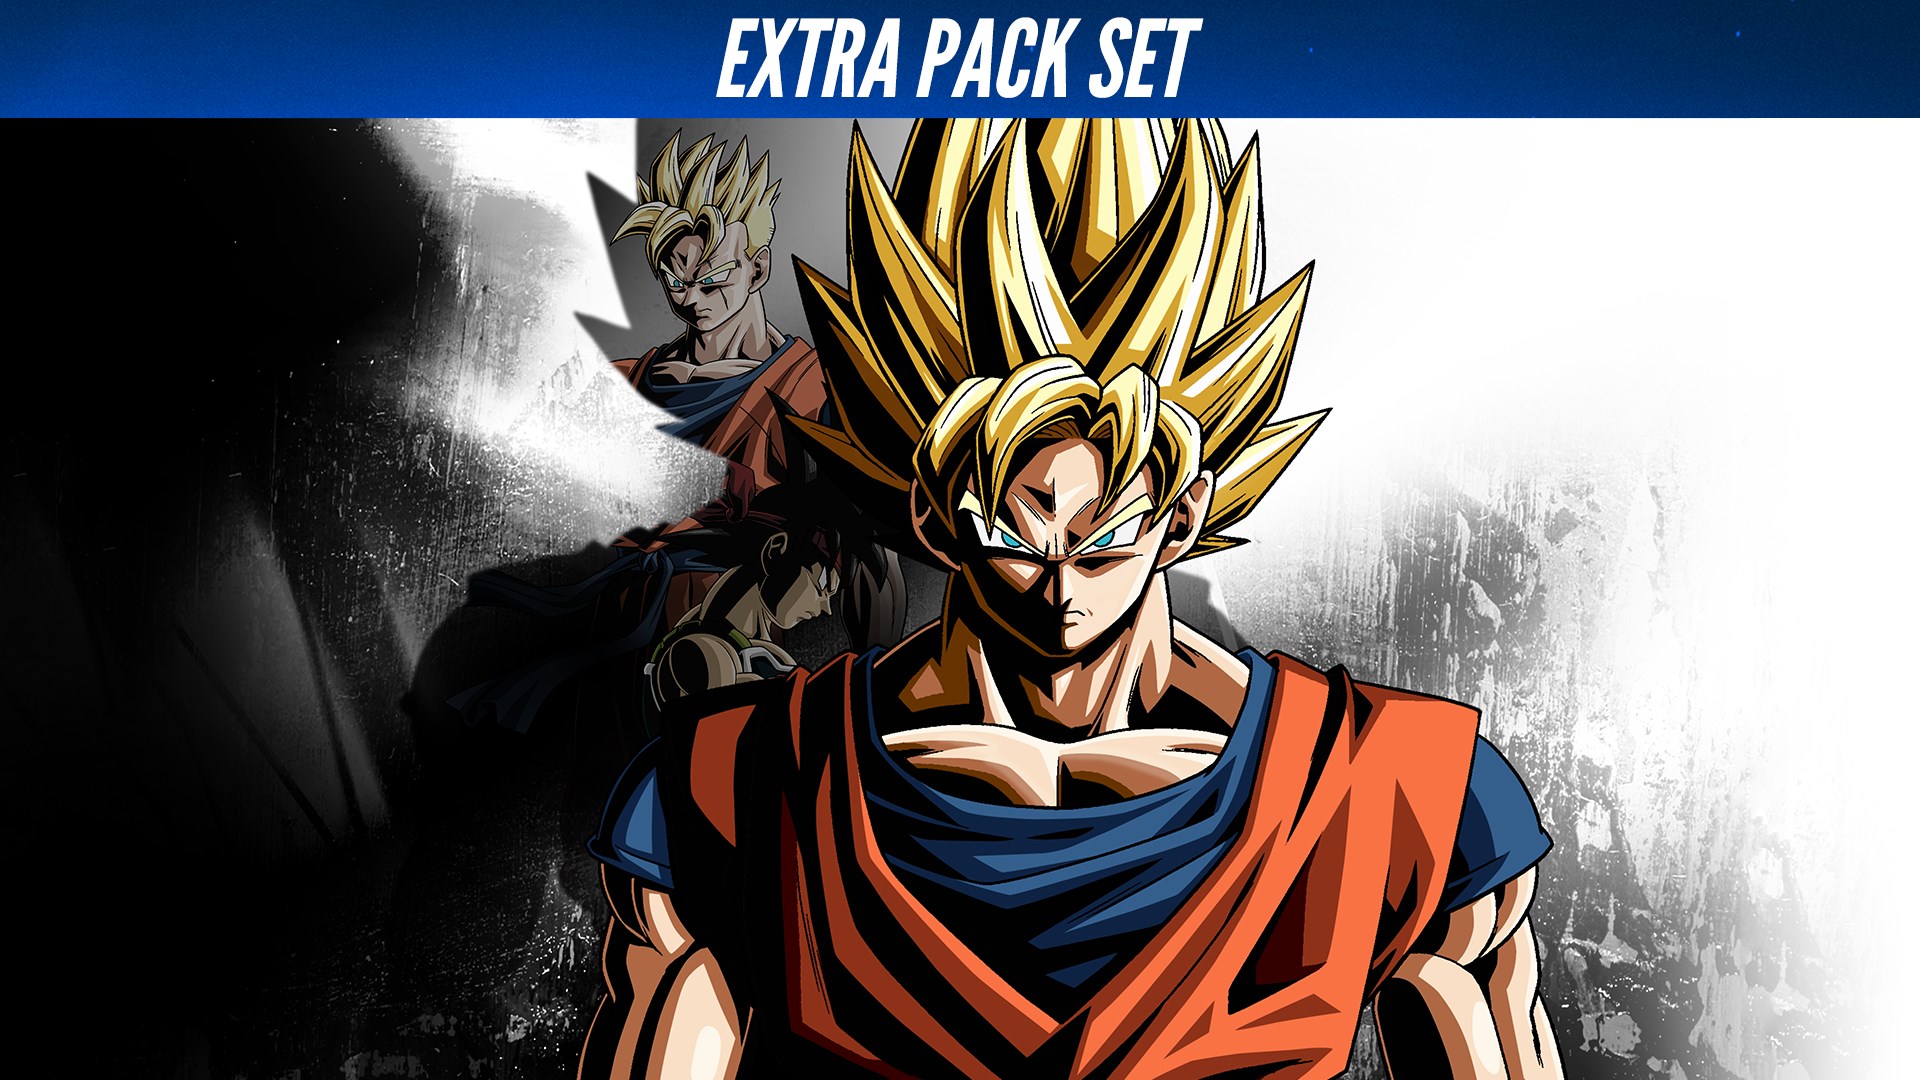 DRAGON BALL XENOVERSE 2 - Lote Extra Pack